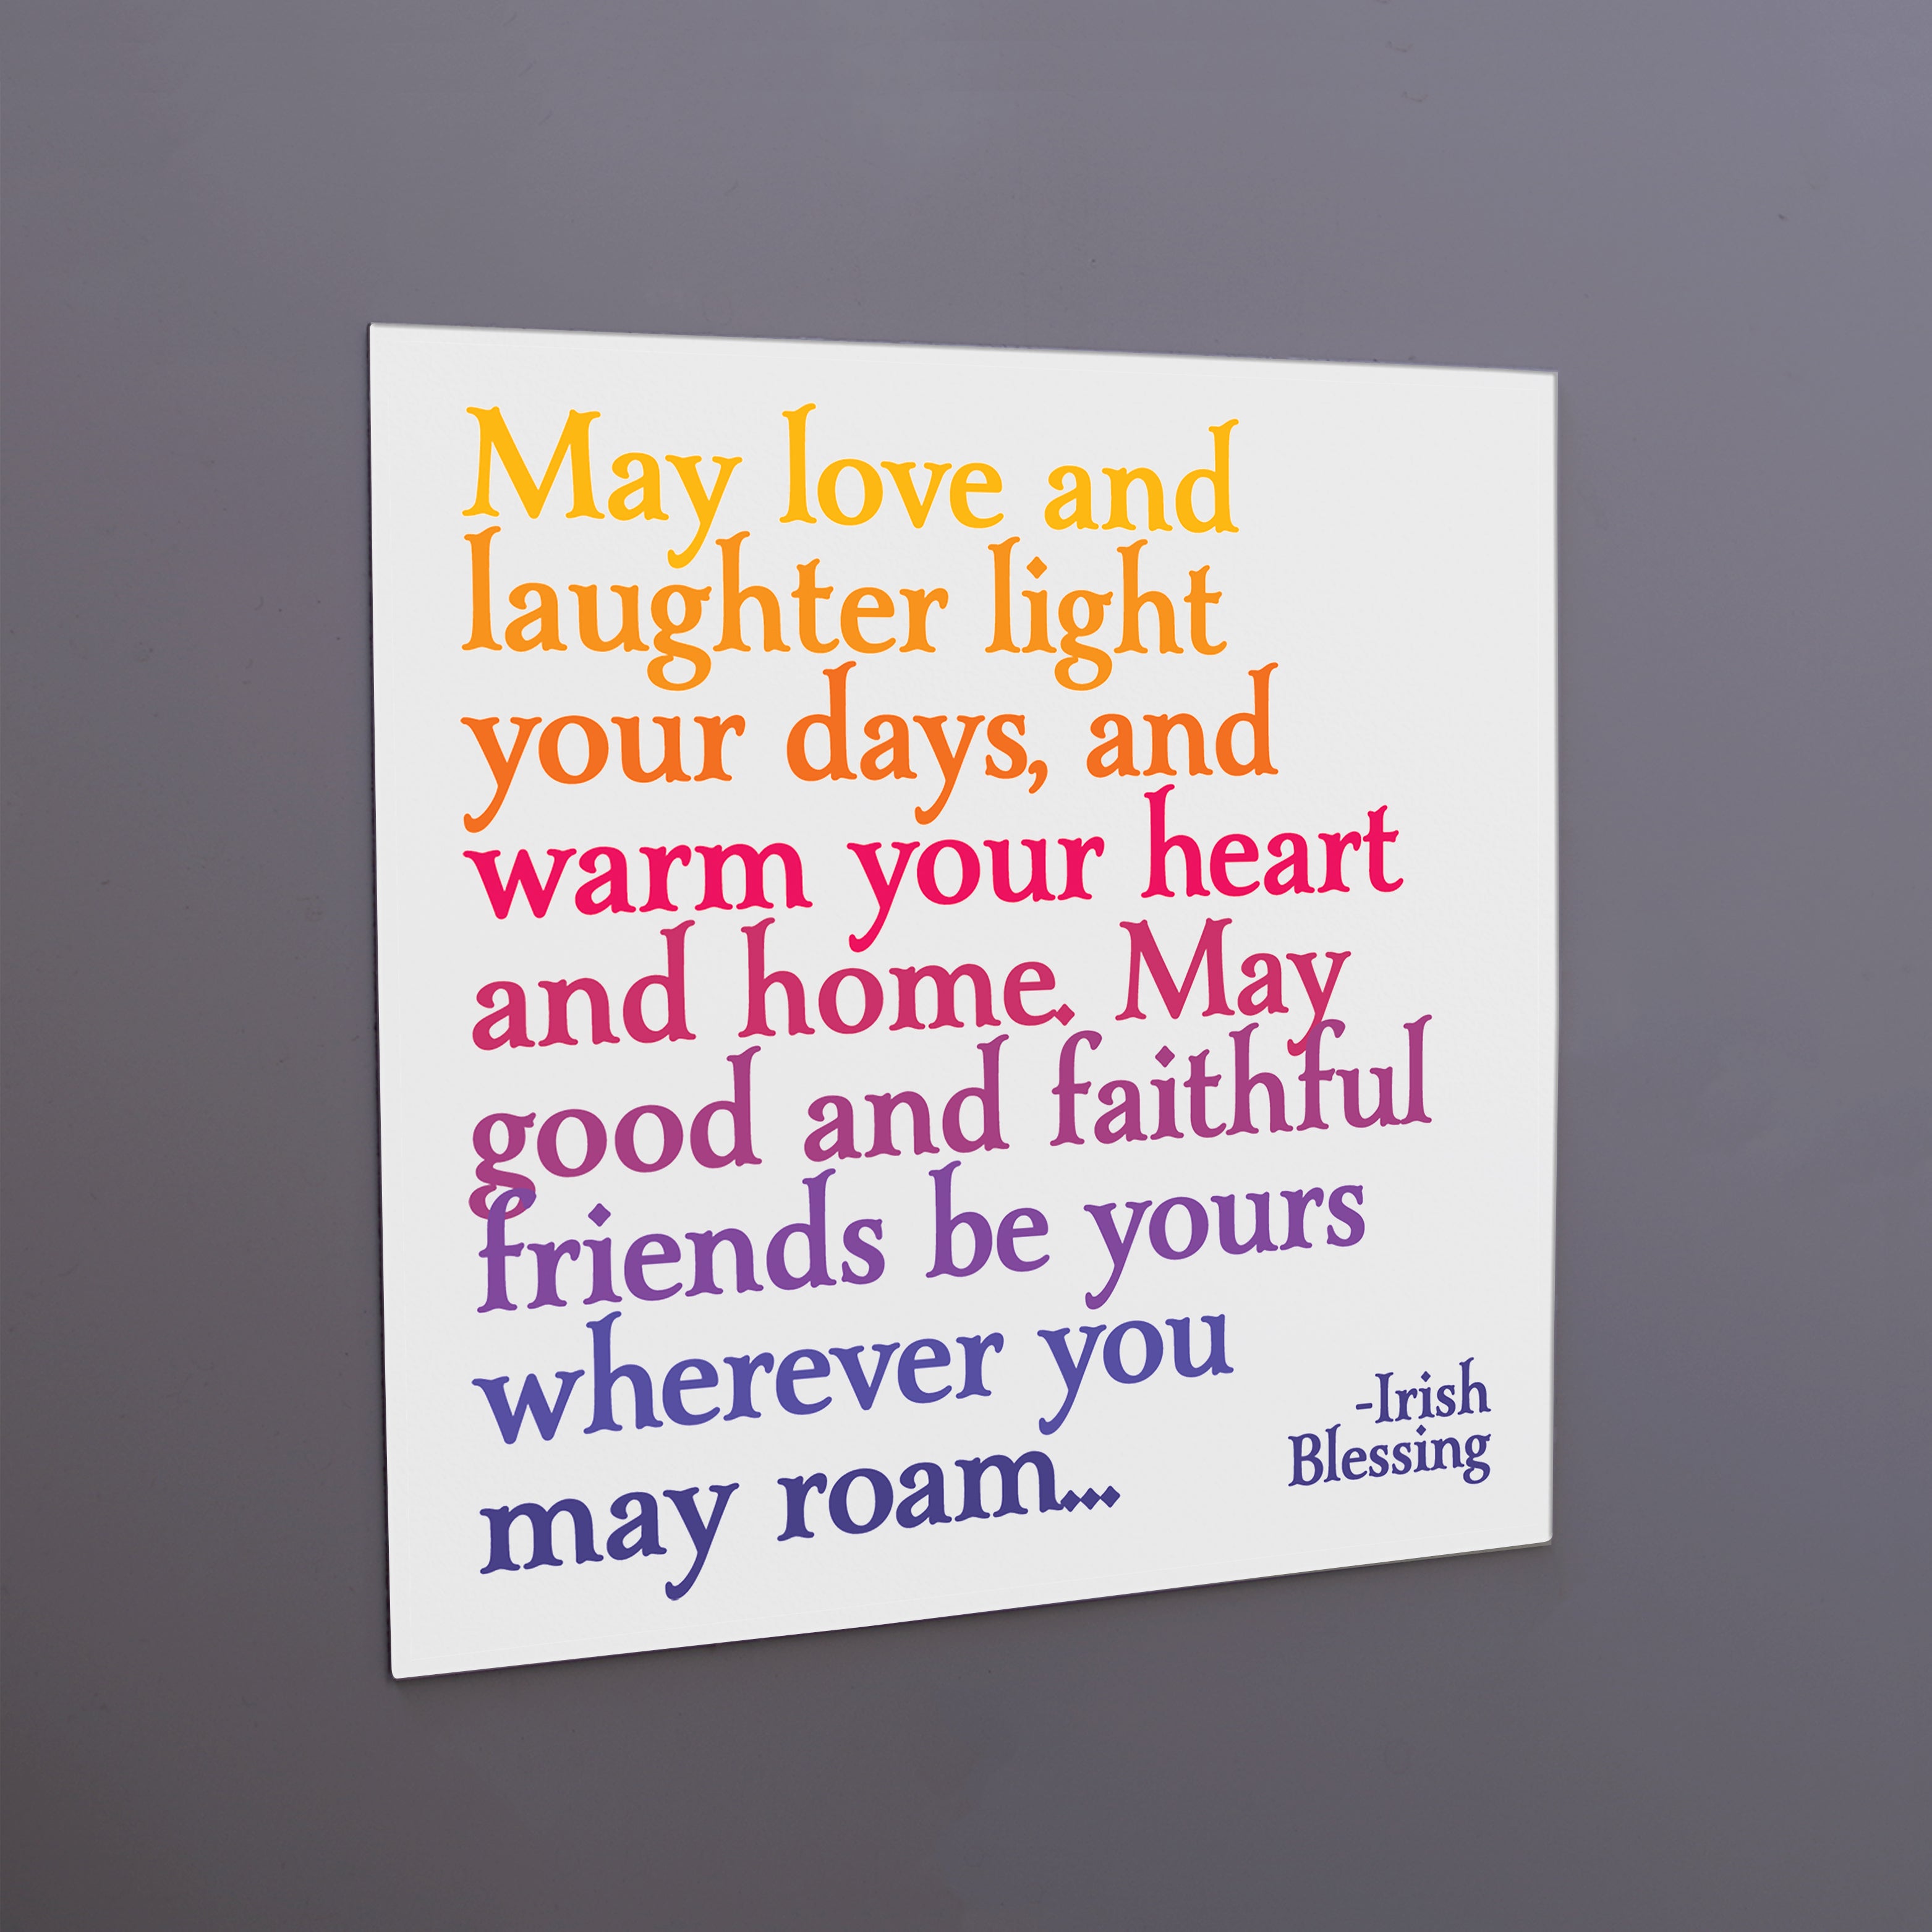 "may love and laughter" magnet